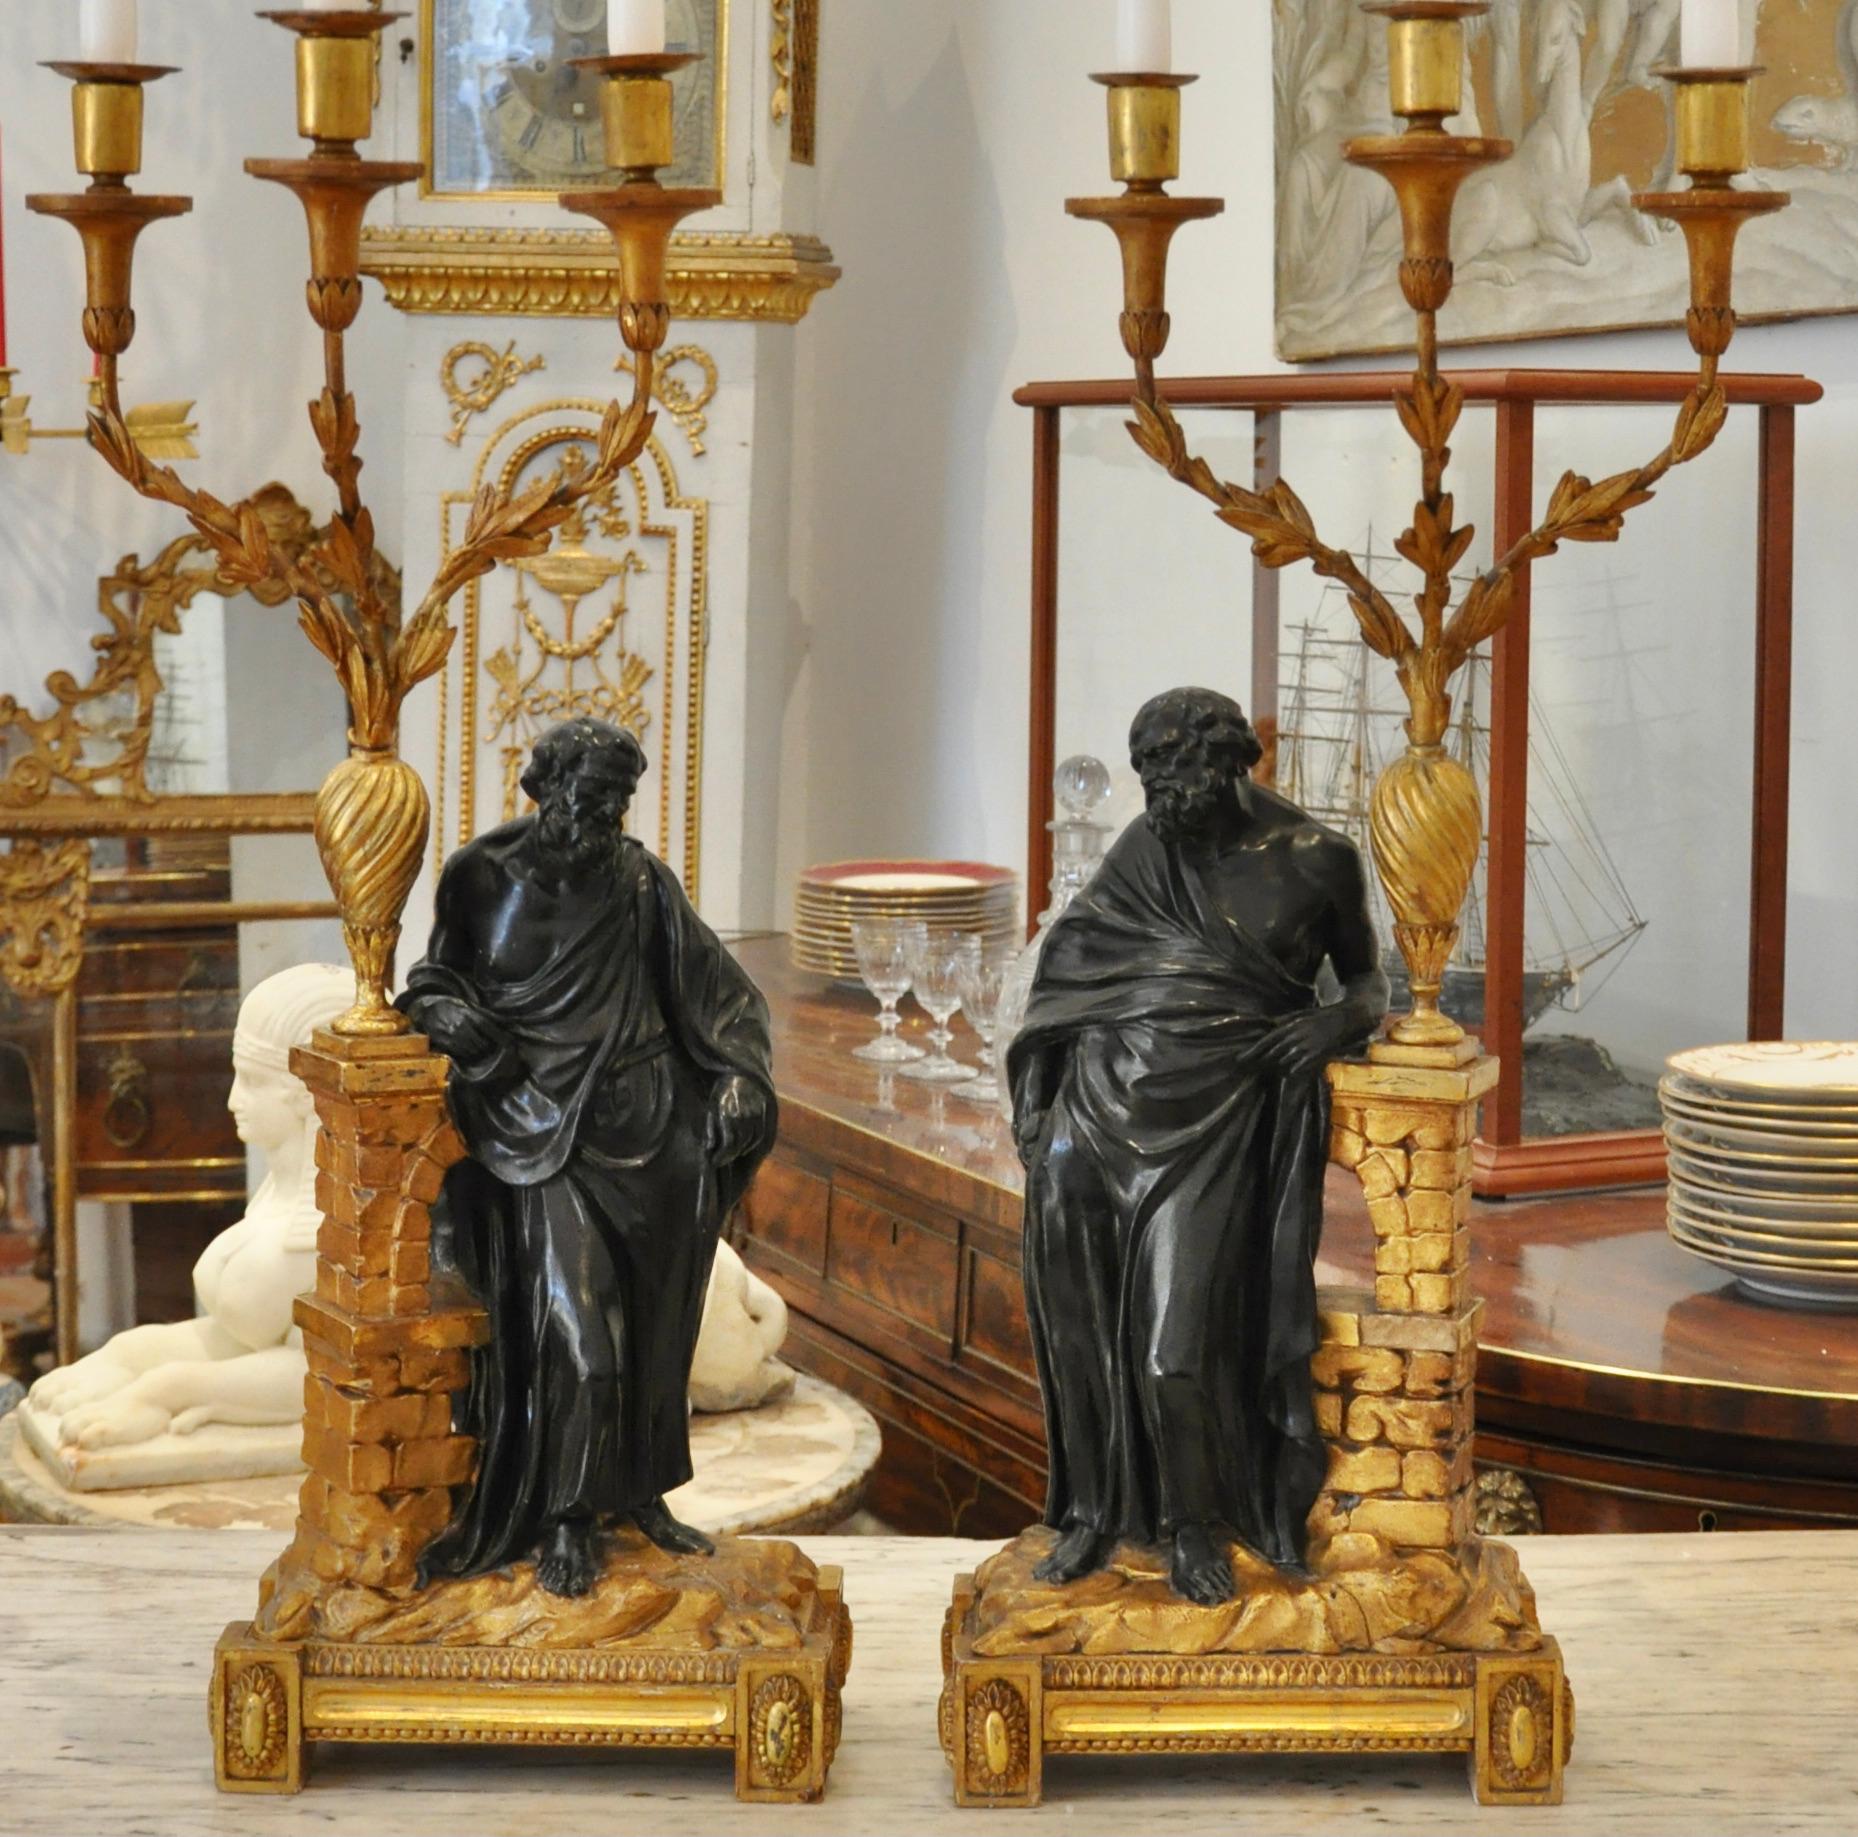 Rare pair of Irish Late Georgian giltwood candelabra of Socrates and Plato. Carved and gilt wooden bases and classical Romantic arches with laurel leafed iron arms issuing from neoclassical urn. Figure of Socrates and Plato in bronzed plaster